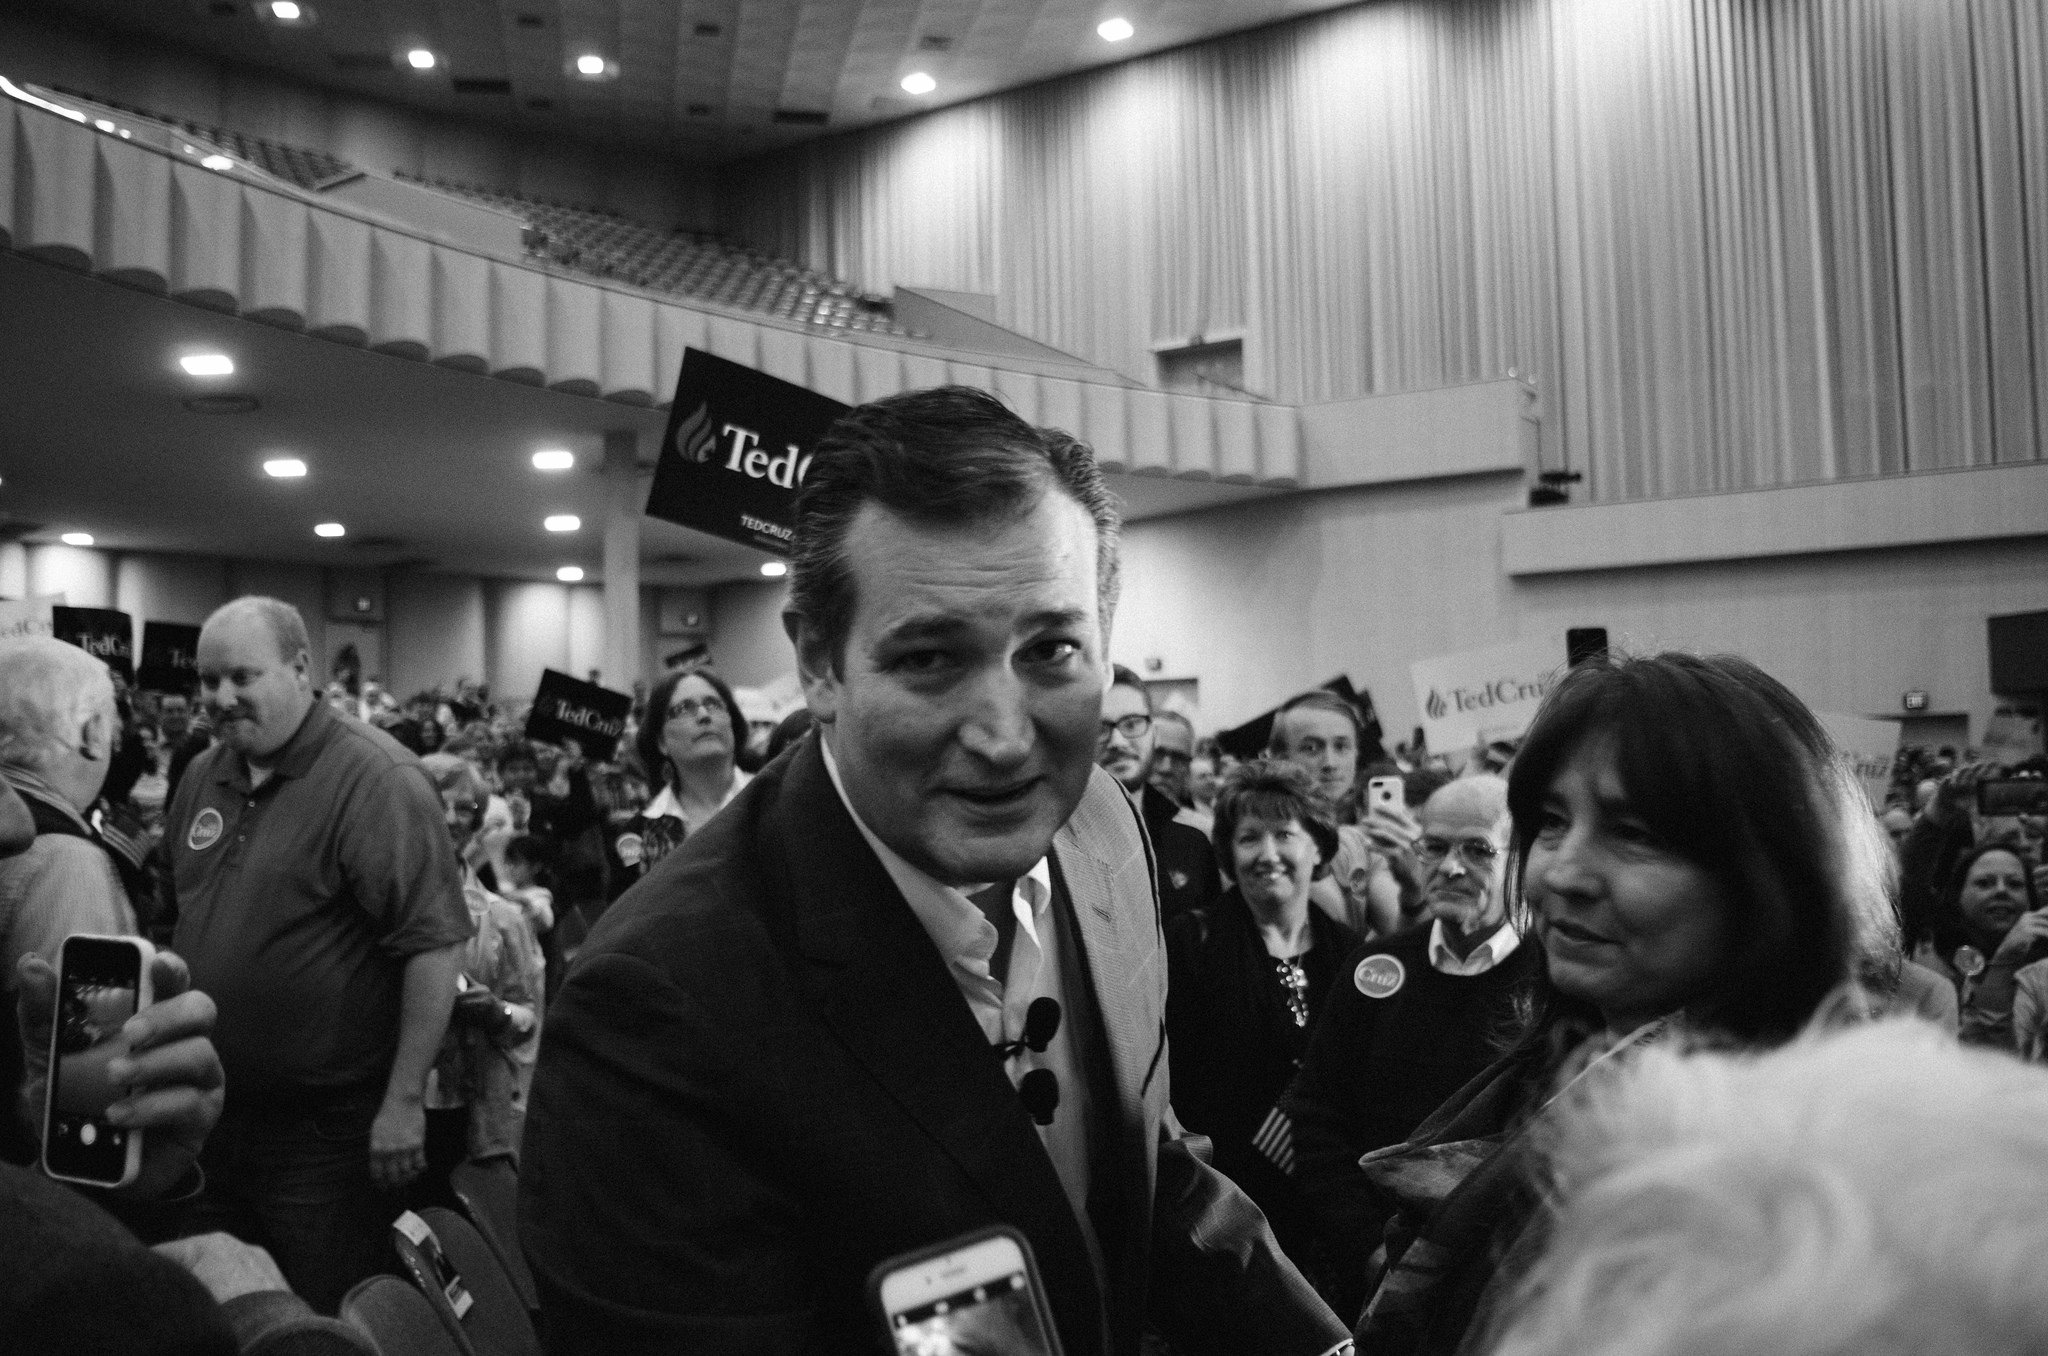 A black and white photo of Ted Cruz in Greenville, South Carolina in November 2015.